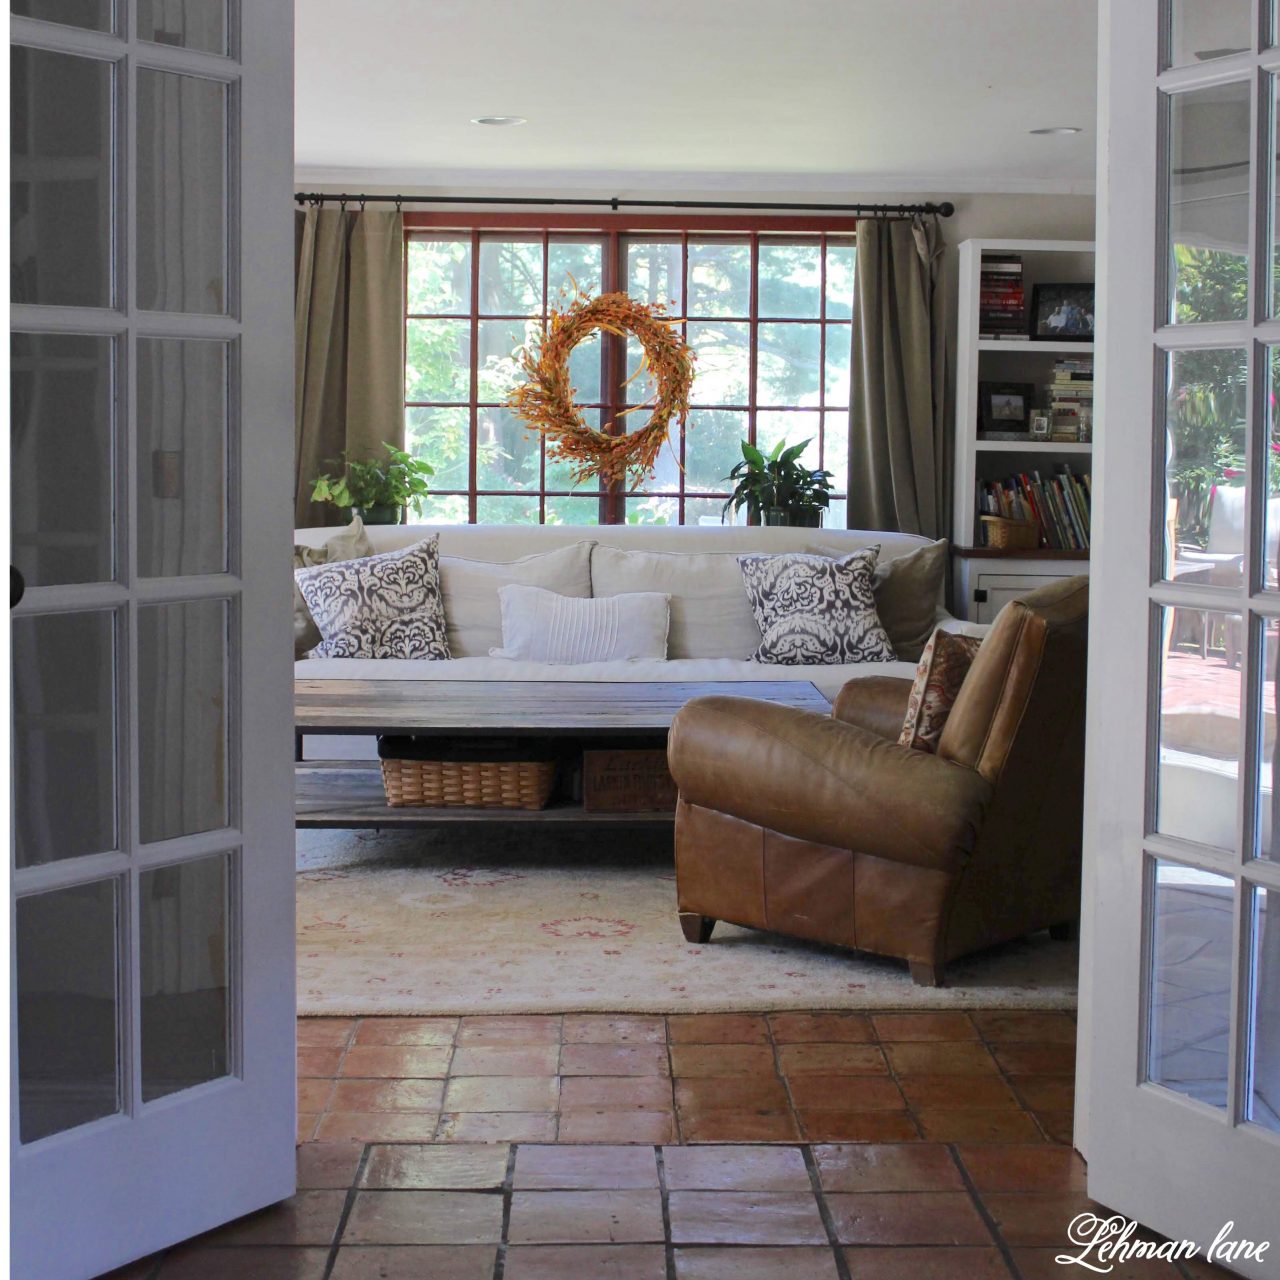 I have long wanted to paint the doors in our family room white. Painting the doors and trim white allowed for more neutral decorating, a more cohesive feel from room to room and makes our family room feel brighter and bigger.  Stop by to check it out #familyroom #whitepaint http://lehmanlane.net